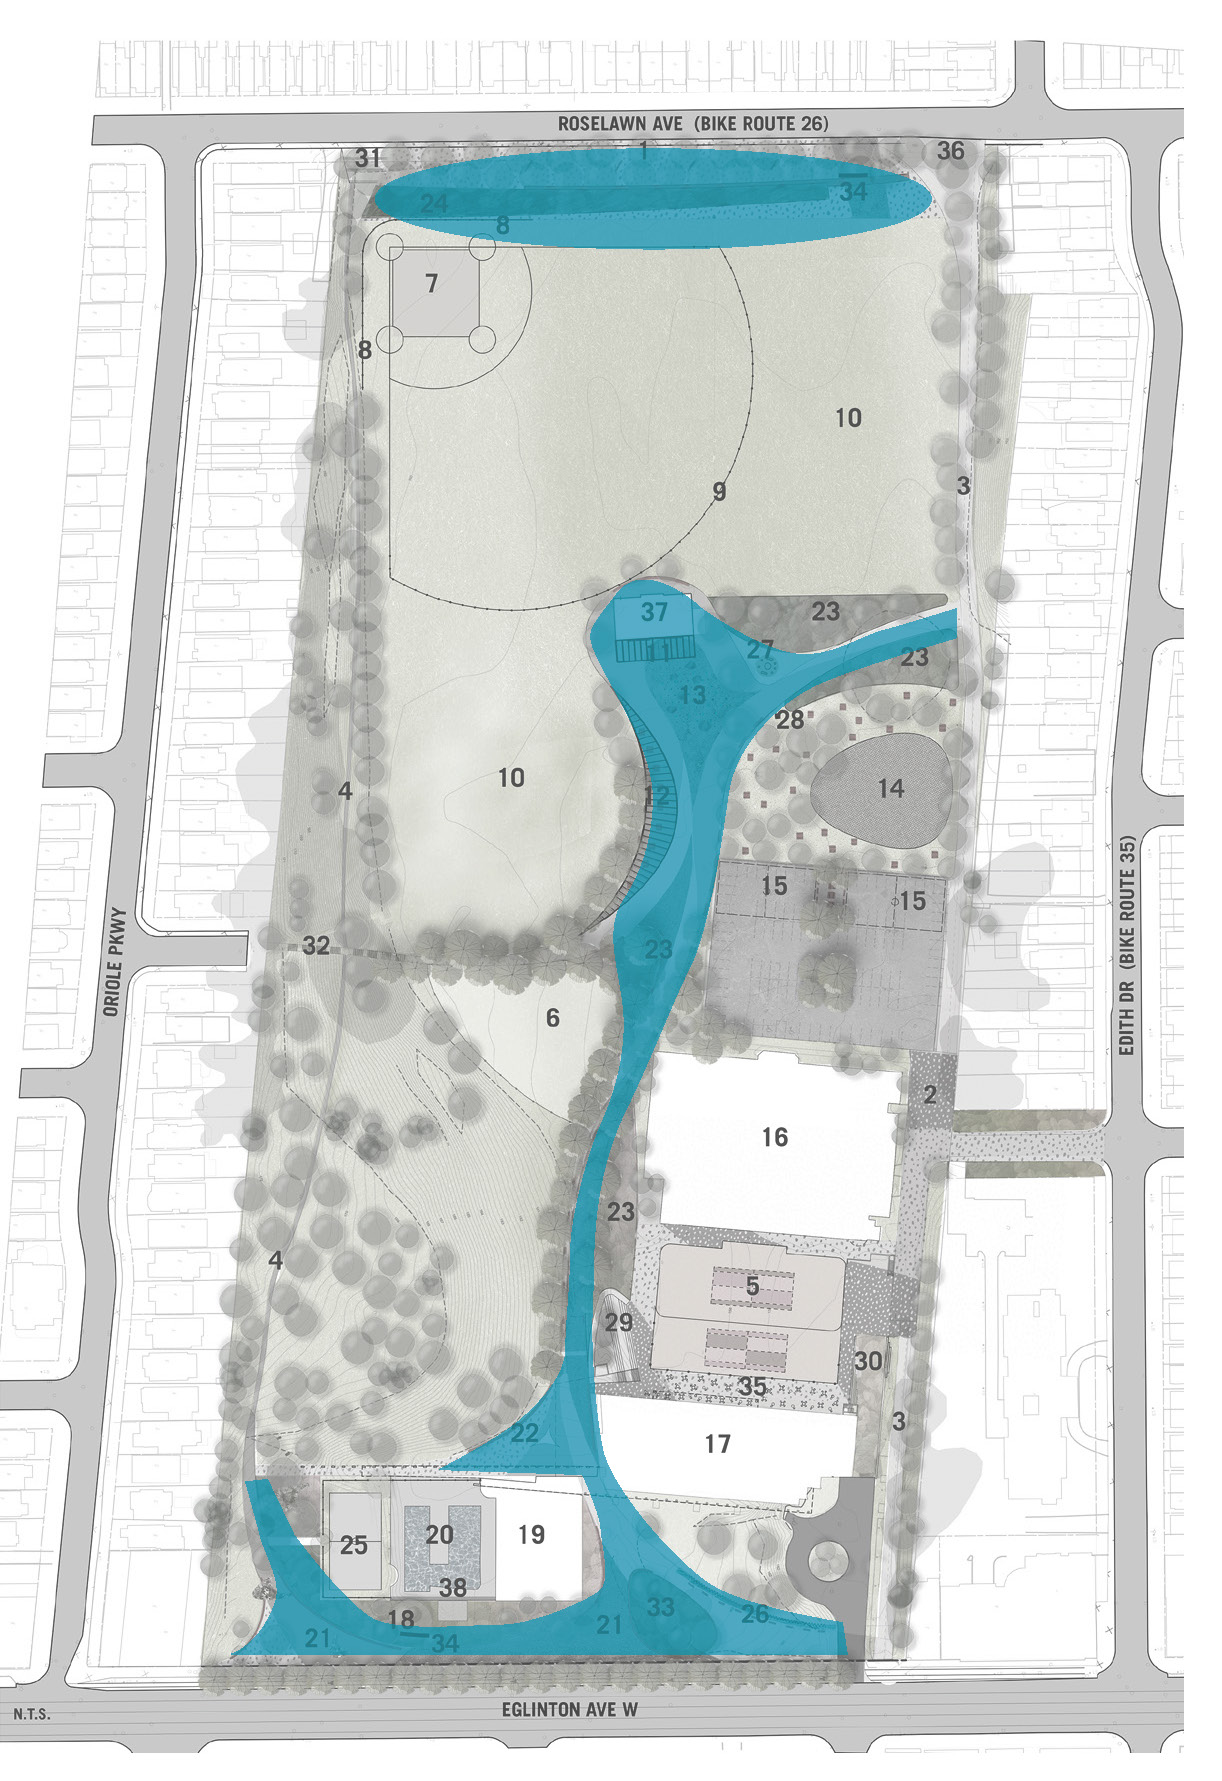 An aerial map of Eglinton Park showing the unprogrammed gathering area identified in the Master Plan in blue. Gathering areas are shown on the north side of the park, along Roselawn Avenue, and the north side of the park along Eglinton Avenue West. A gathering area is also shown in the centre of the park along the main pathway.